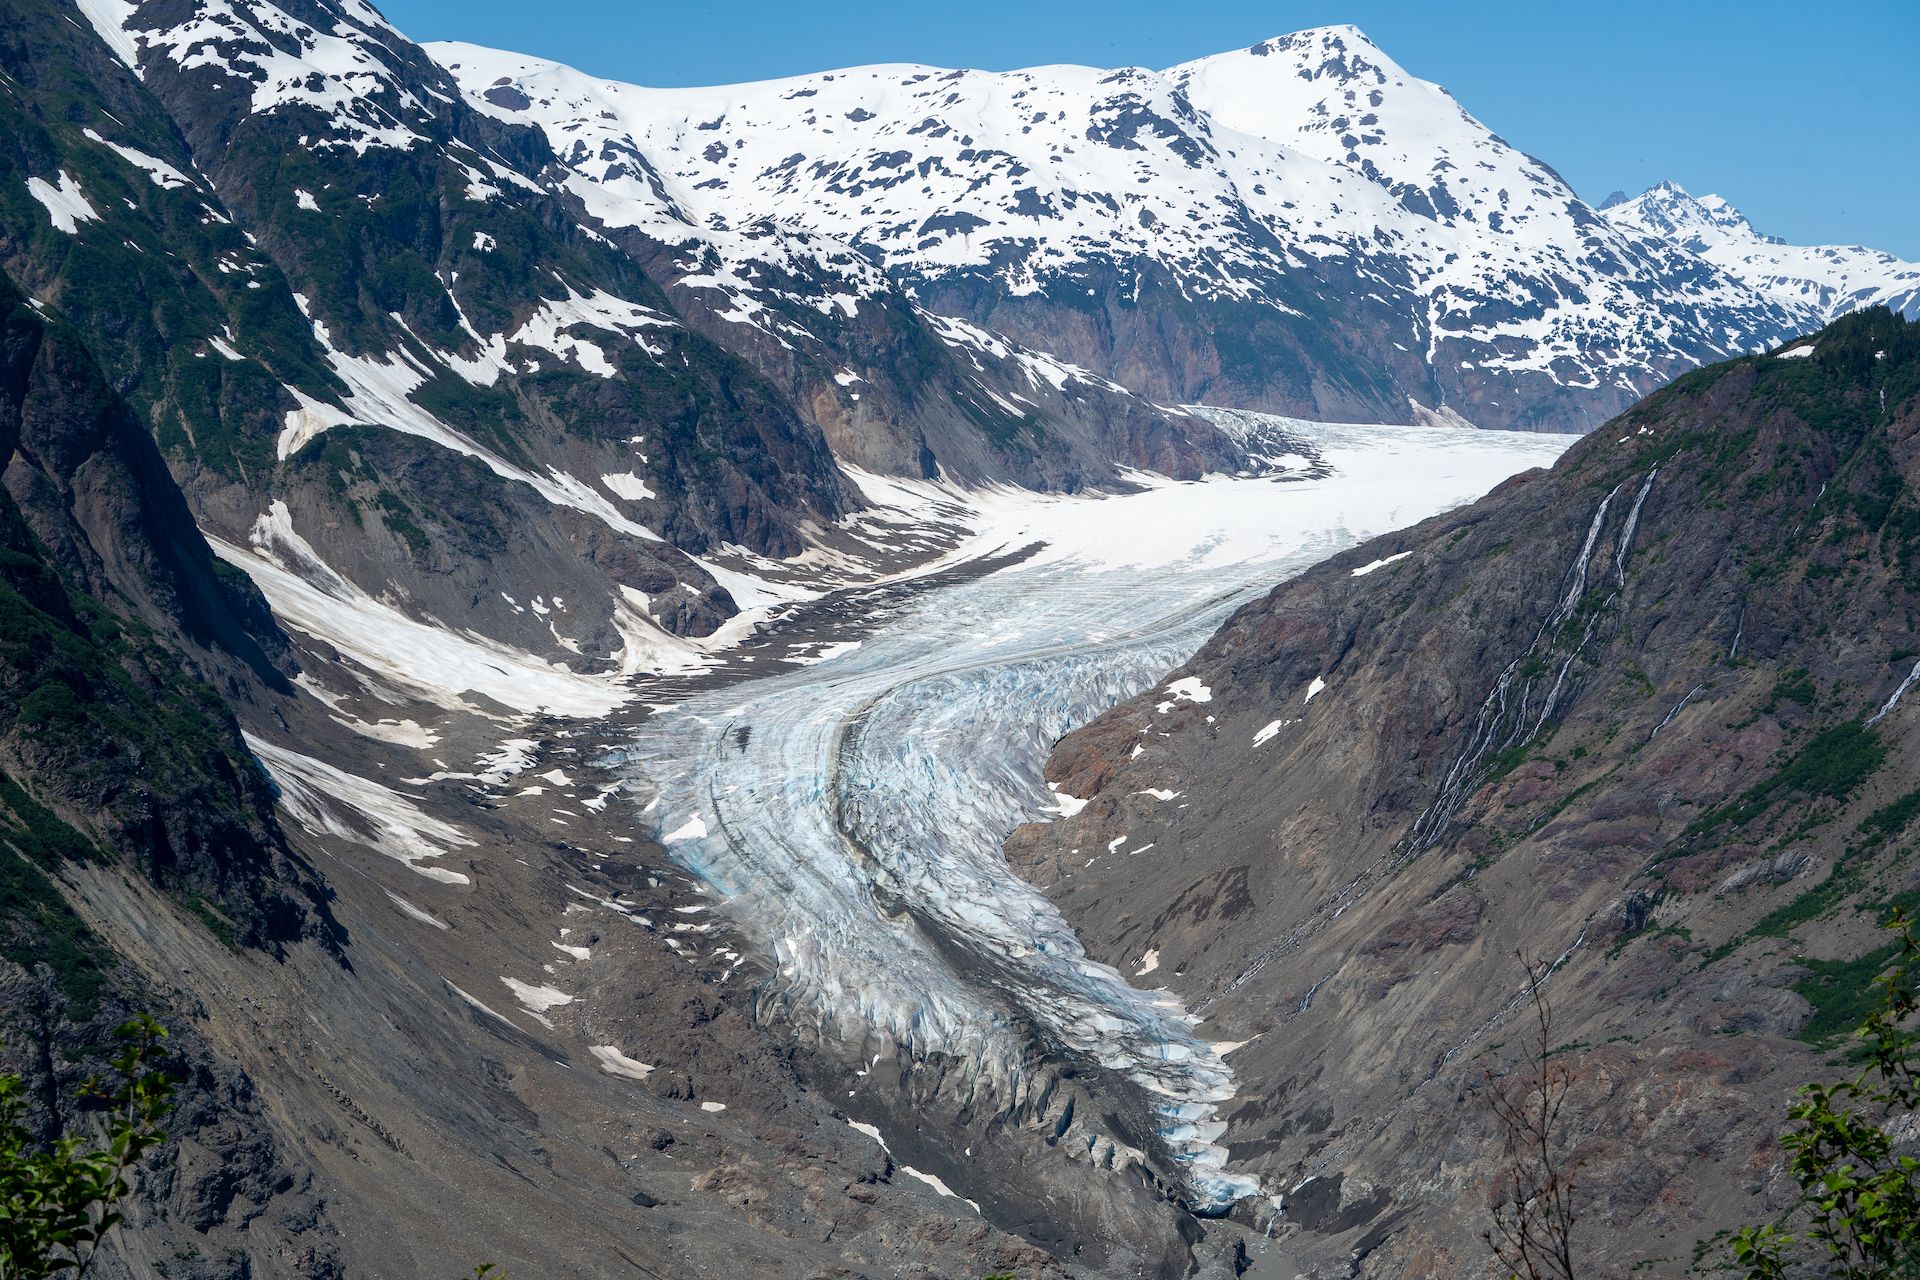 First view of the Salmon glacier